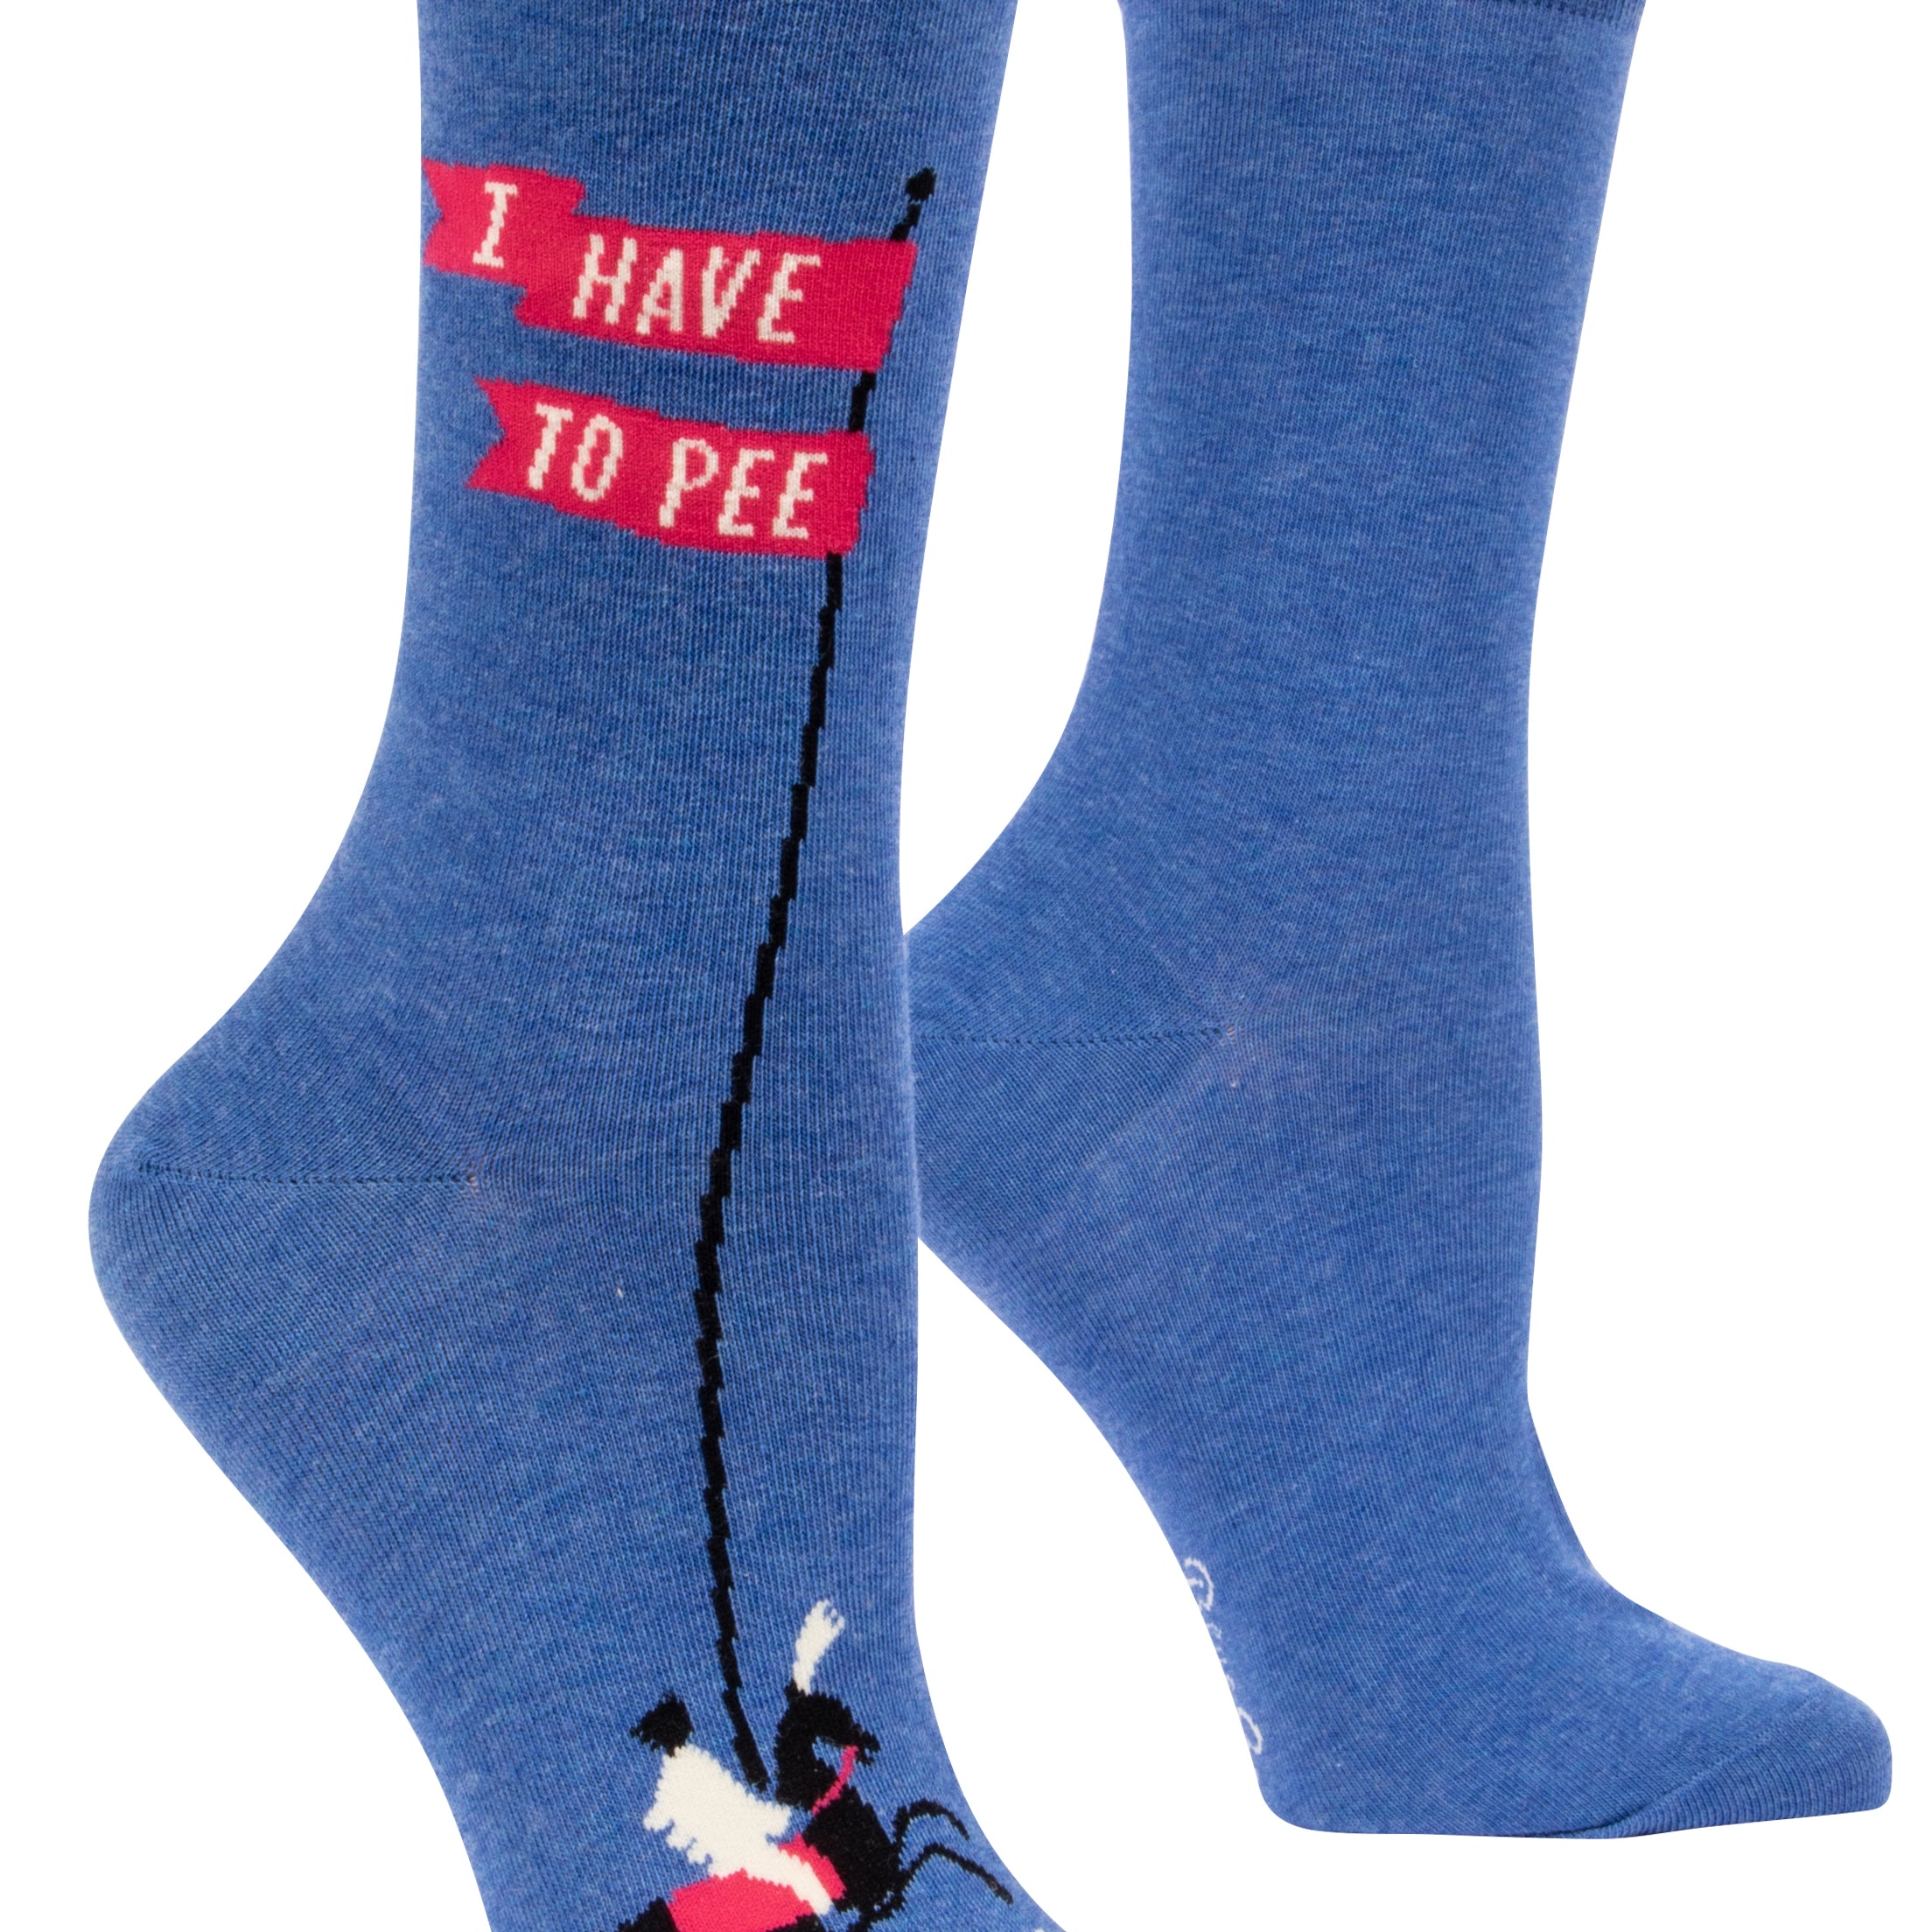 blue socks with a cartoon horse rider on toe holding tall flags on poll that say i have to pee again